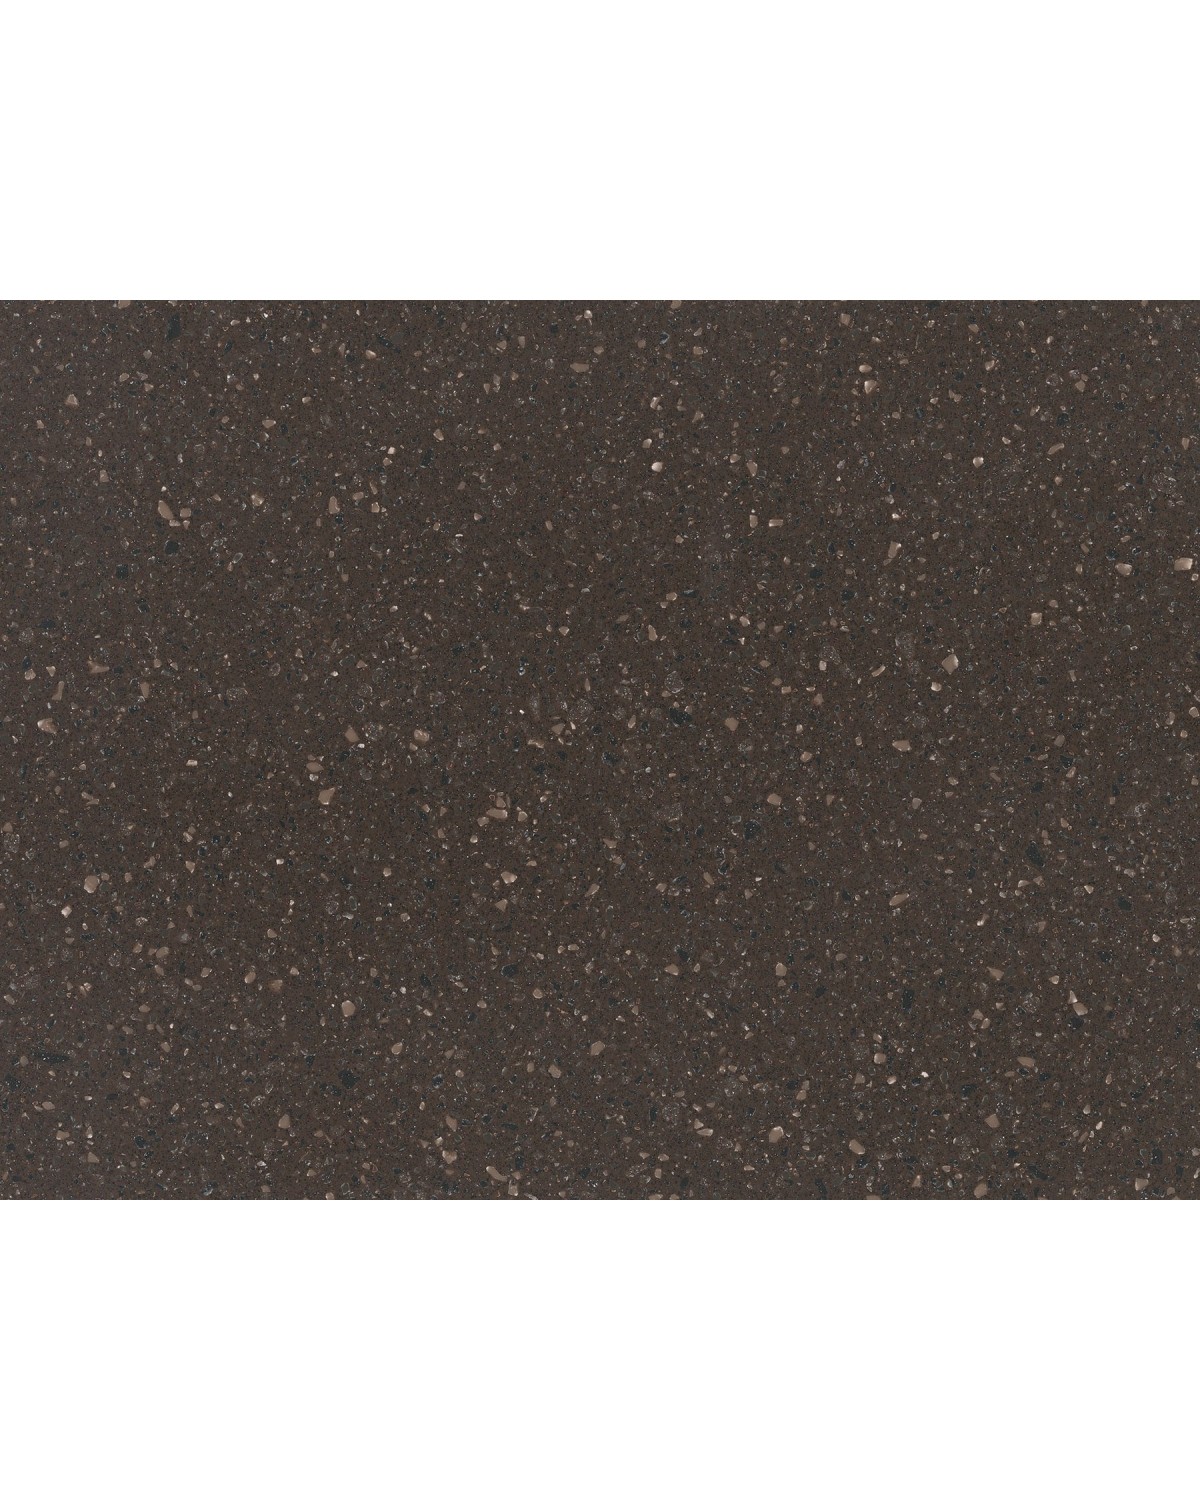 Superficie Solida DuPont™ Corian® Cocoa Brown